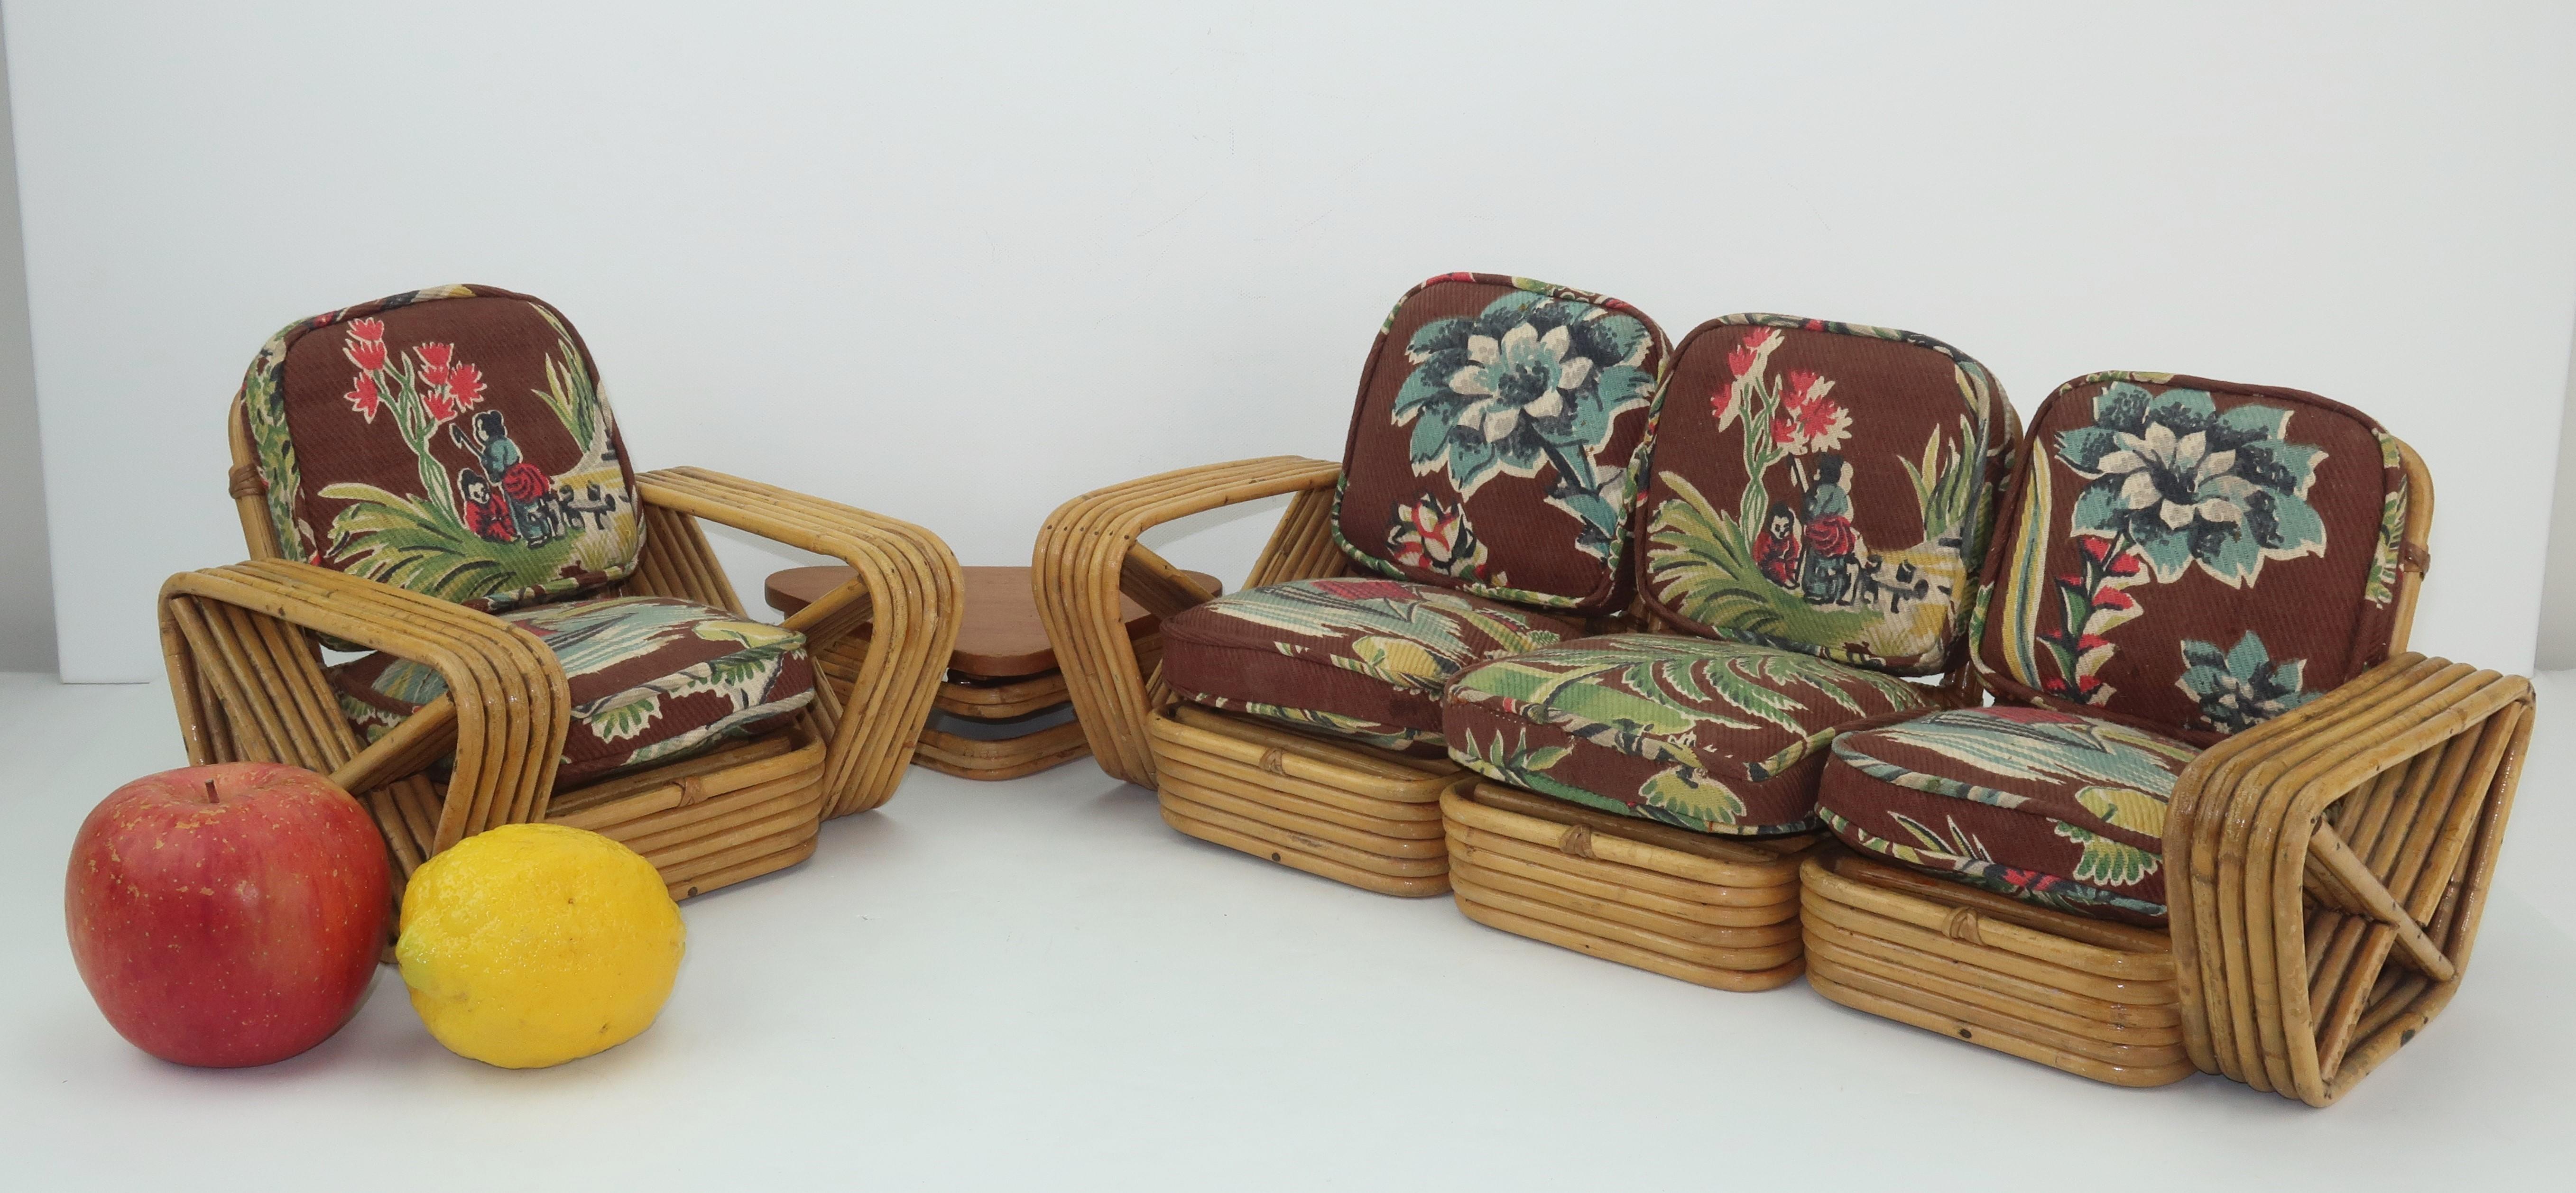 How cute is this! A miniature rattan and barkcloth set replicates Paul Frankl’s 1940’s design with an air of World War II era tropical style. The salesman sample consists of a three piece sofa, one arm chair, one side chair, one corner table, eight